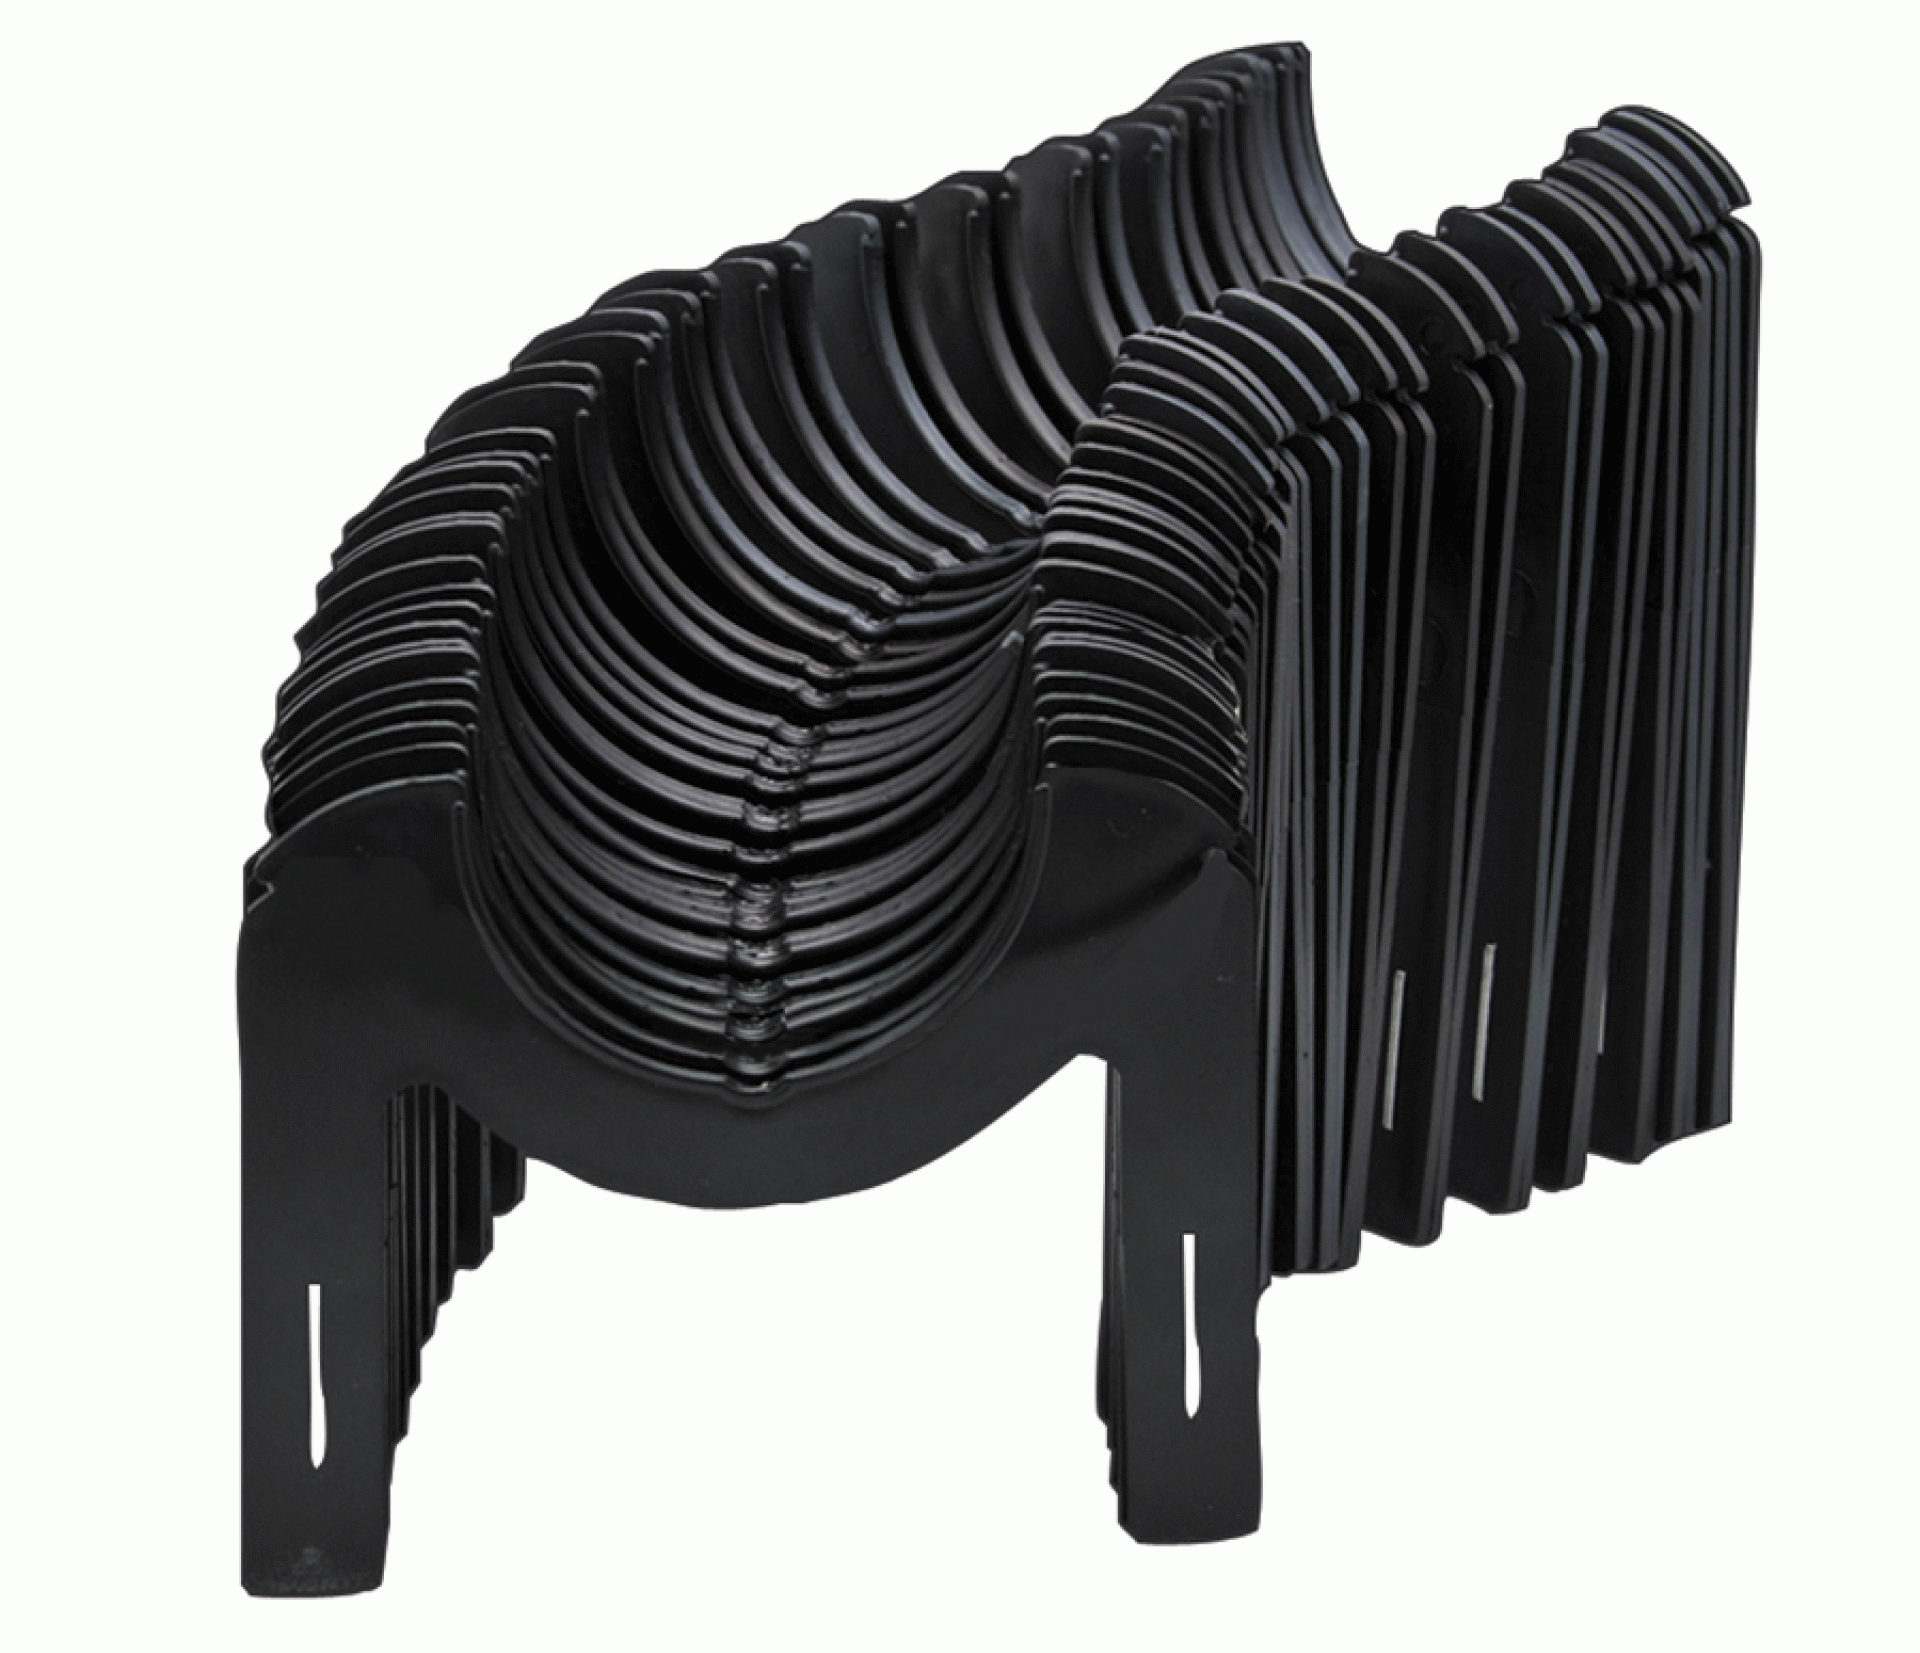 VALTERRA PRODUCTS INC. | S2000 | SEWER HOSE SUPPORT 20' SLUNKY